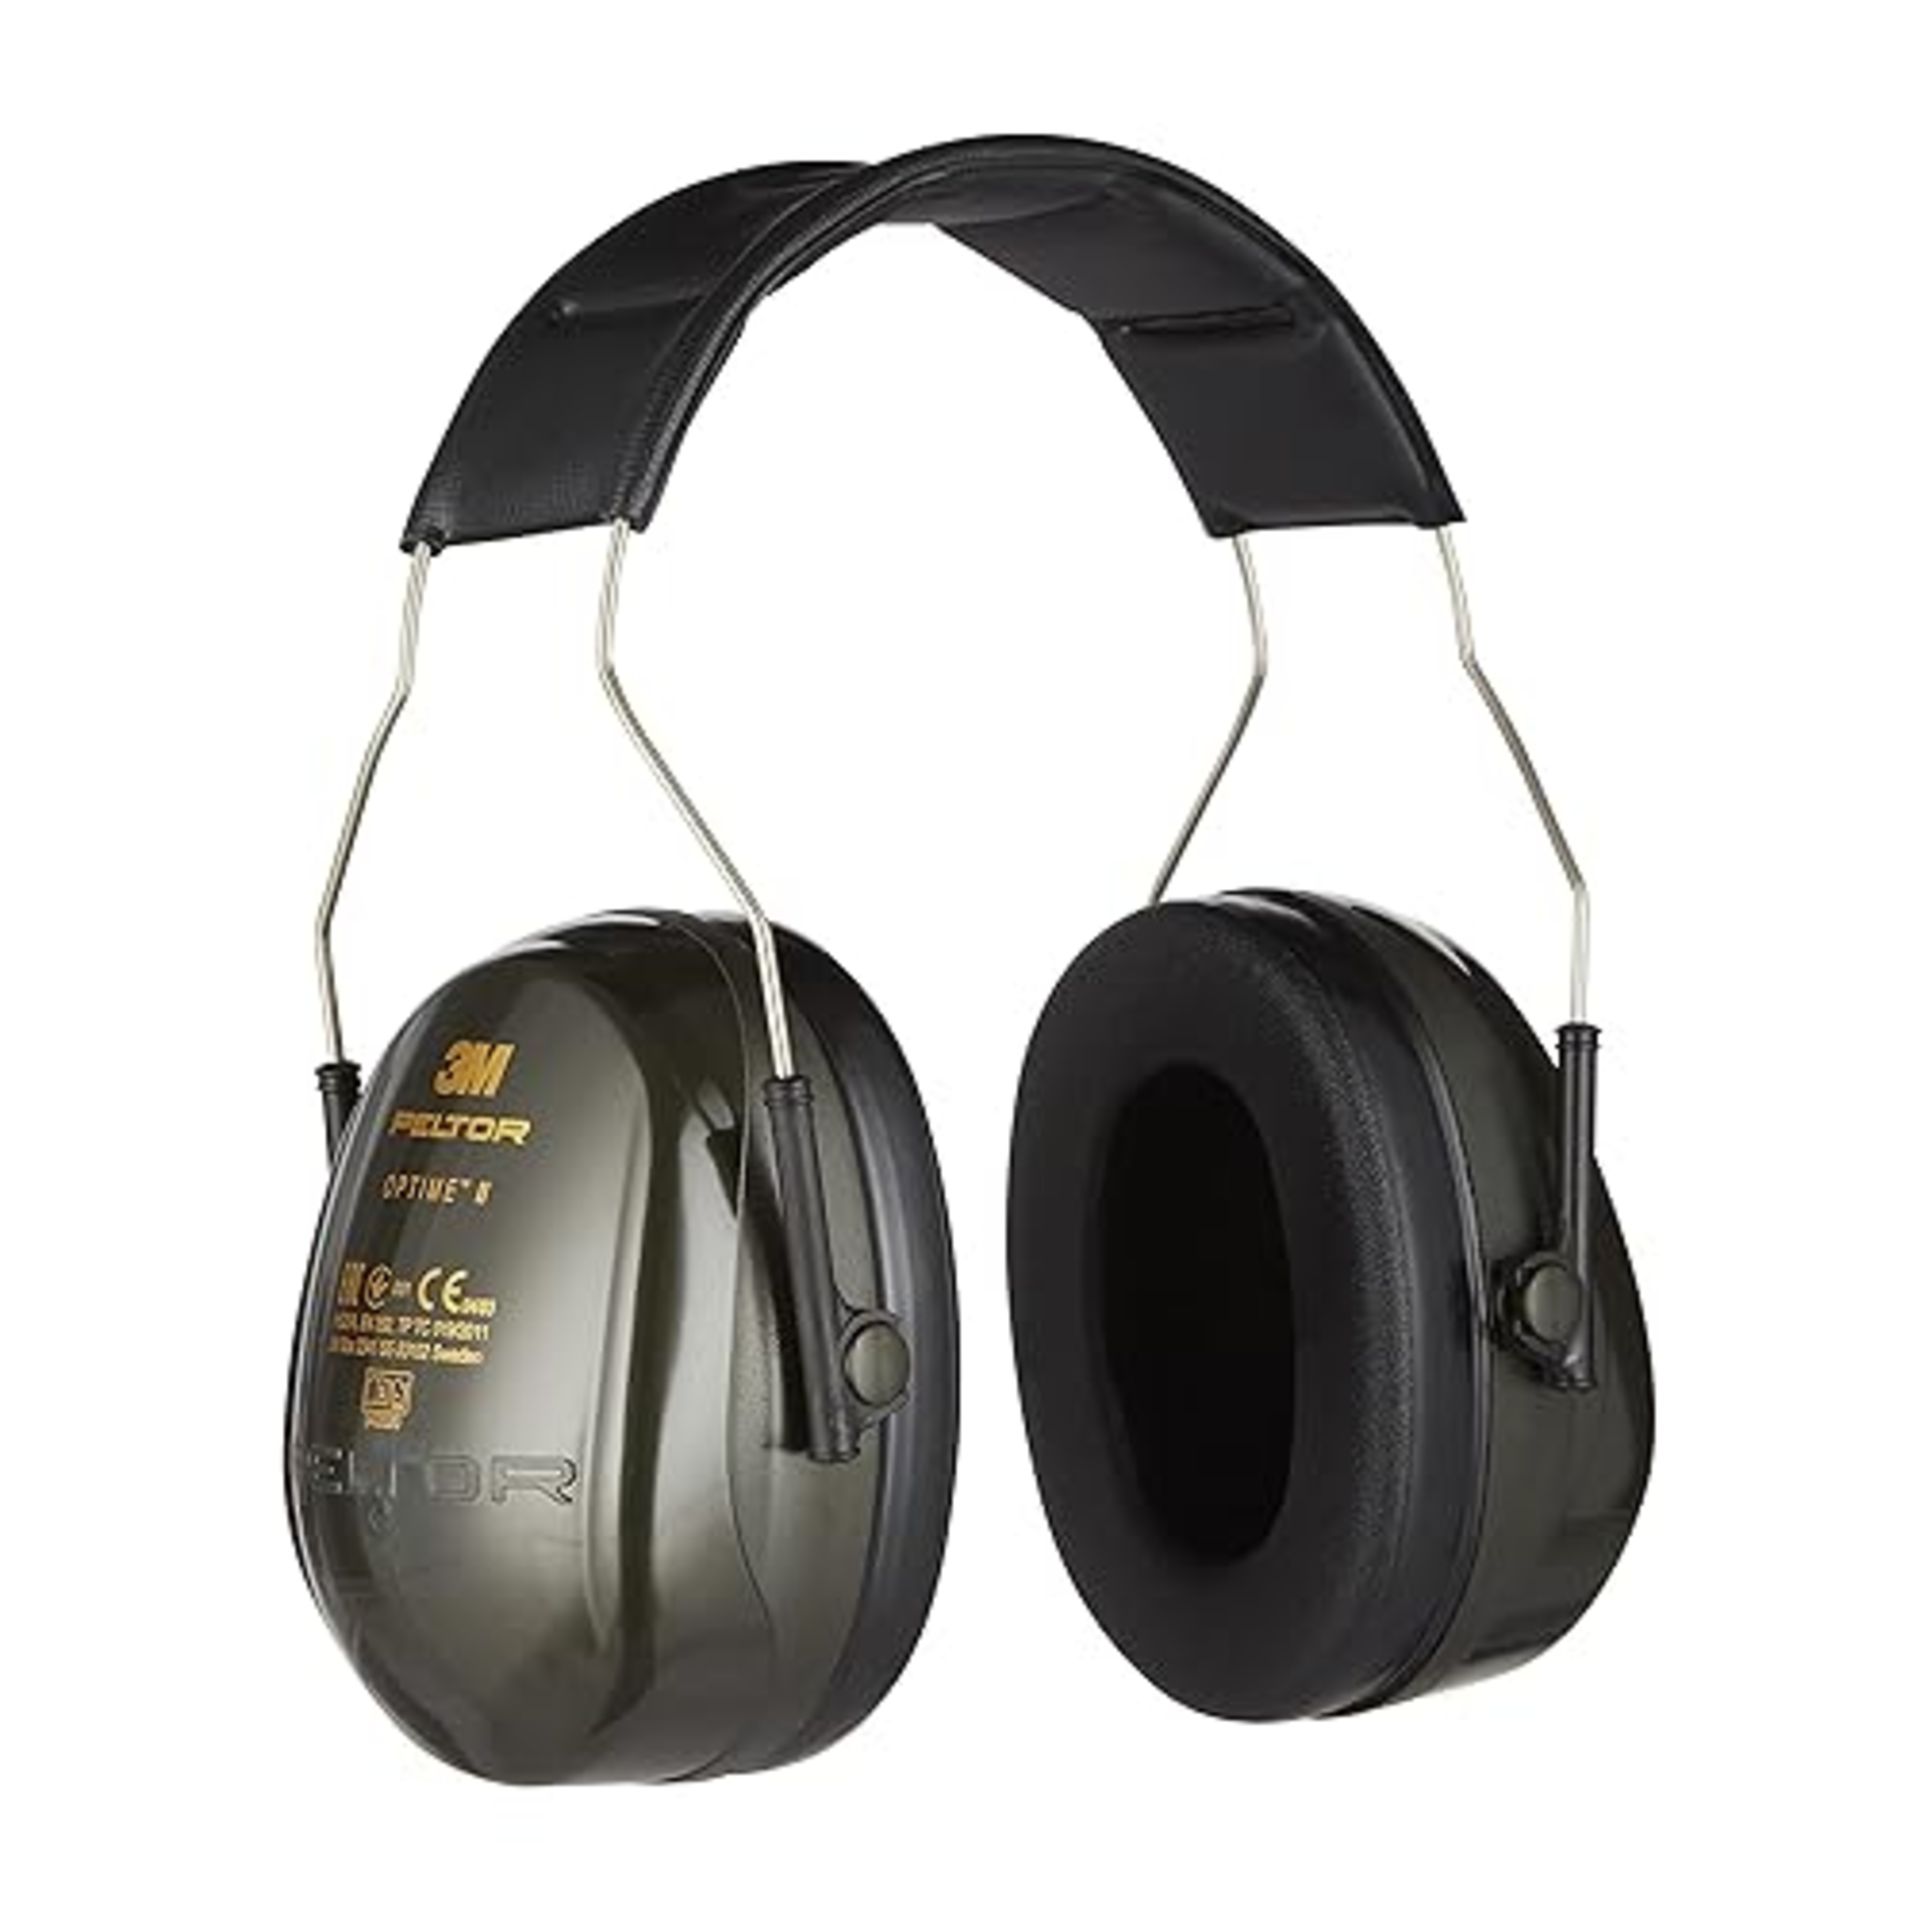 3M Peltor Optime II Comfort Earmuffs H520AC1, Ear Defenders Adults, Comfortable Fit With Reduced...